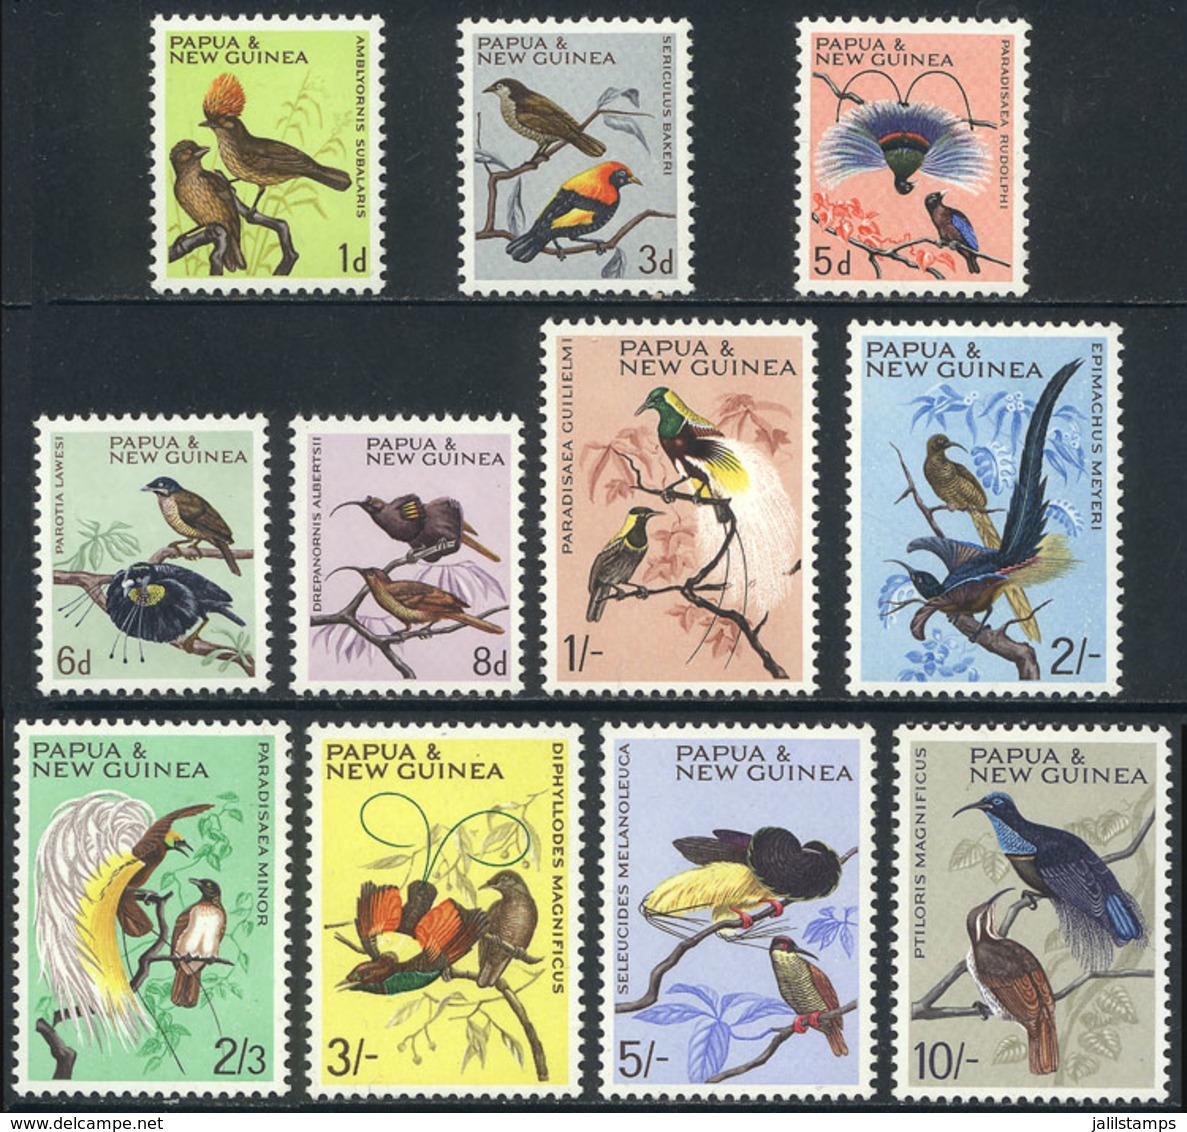 1643 PAPUA NEW GUINEA: Sc.188/198, 1964/5 Birds, Complete Set Of 11 Unmounted Values, Very Fine Quality. - Papua New Guinea